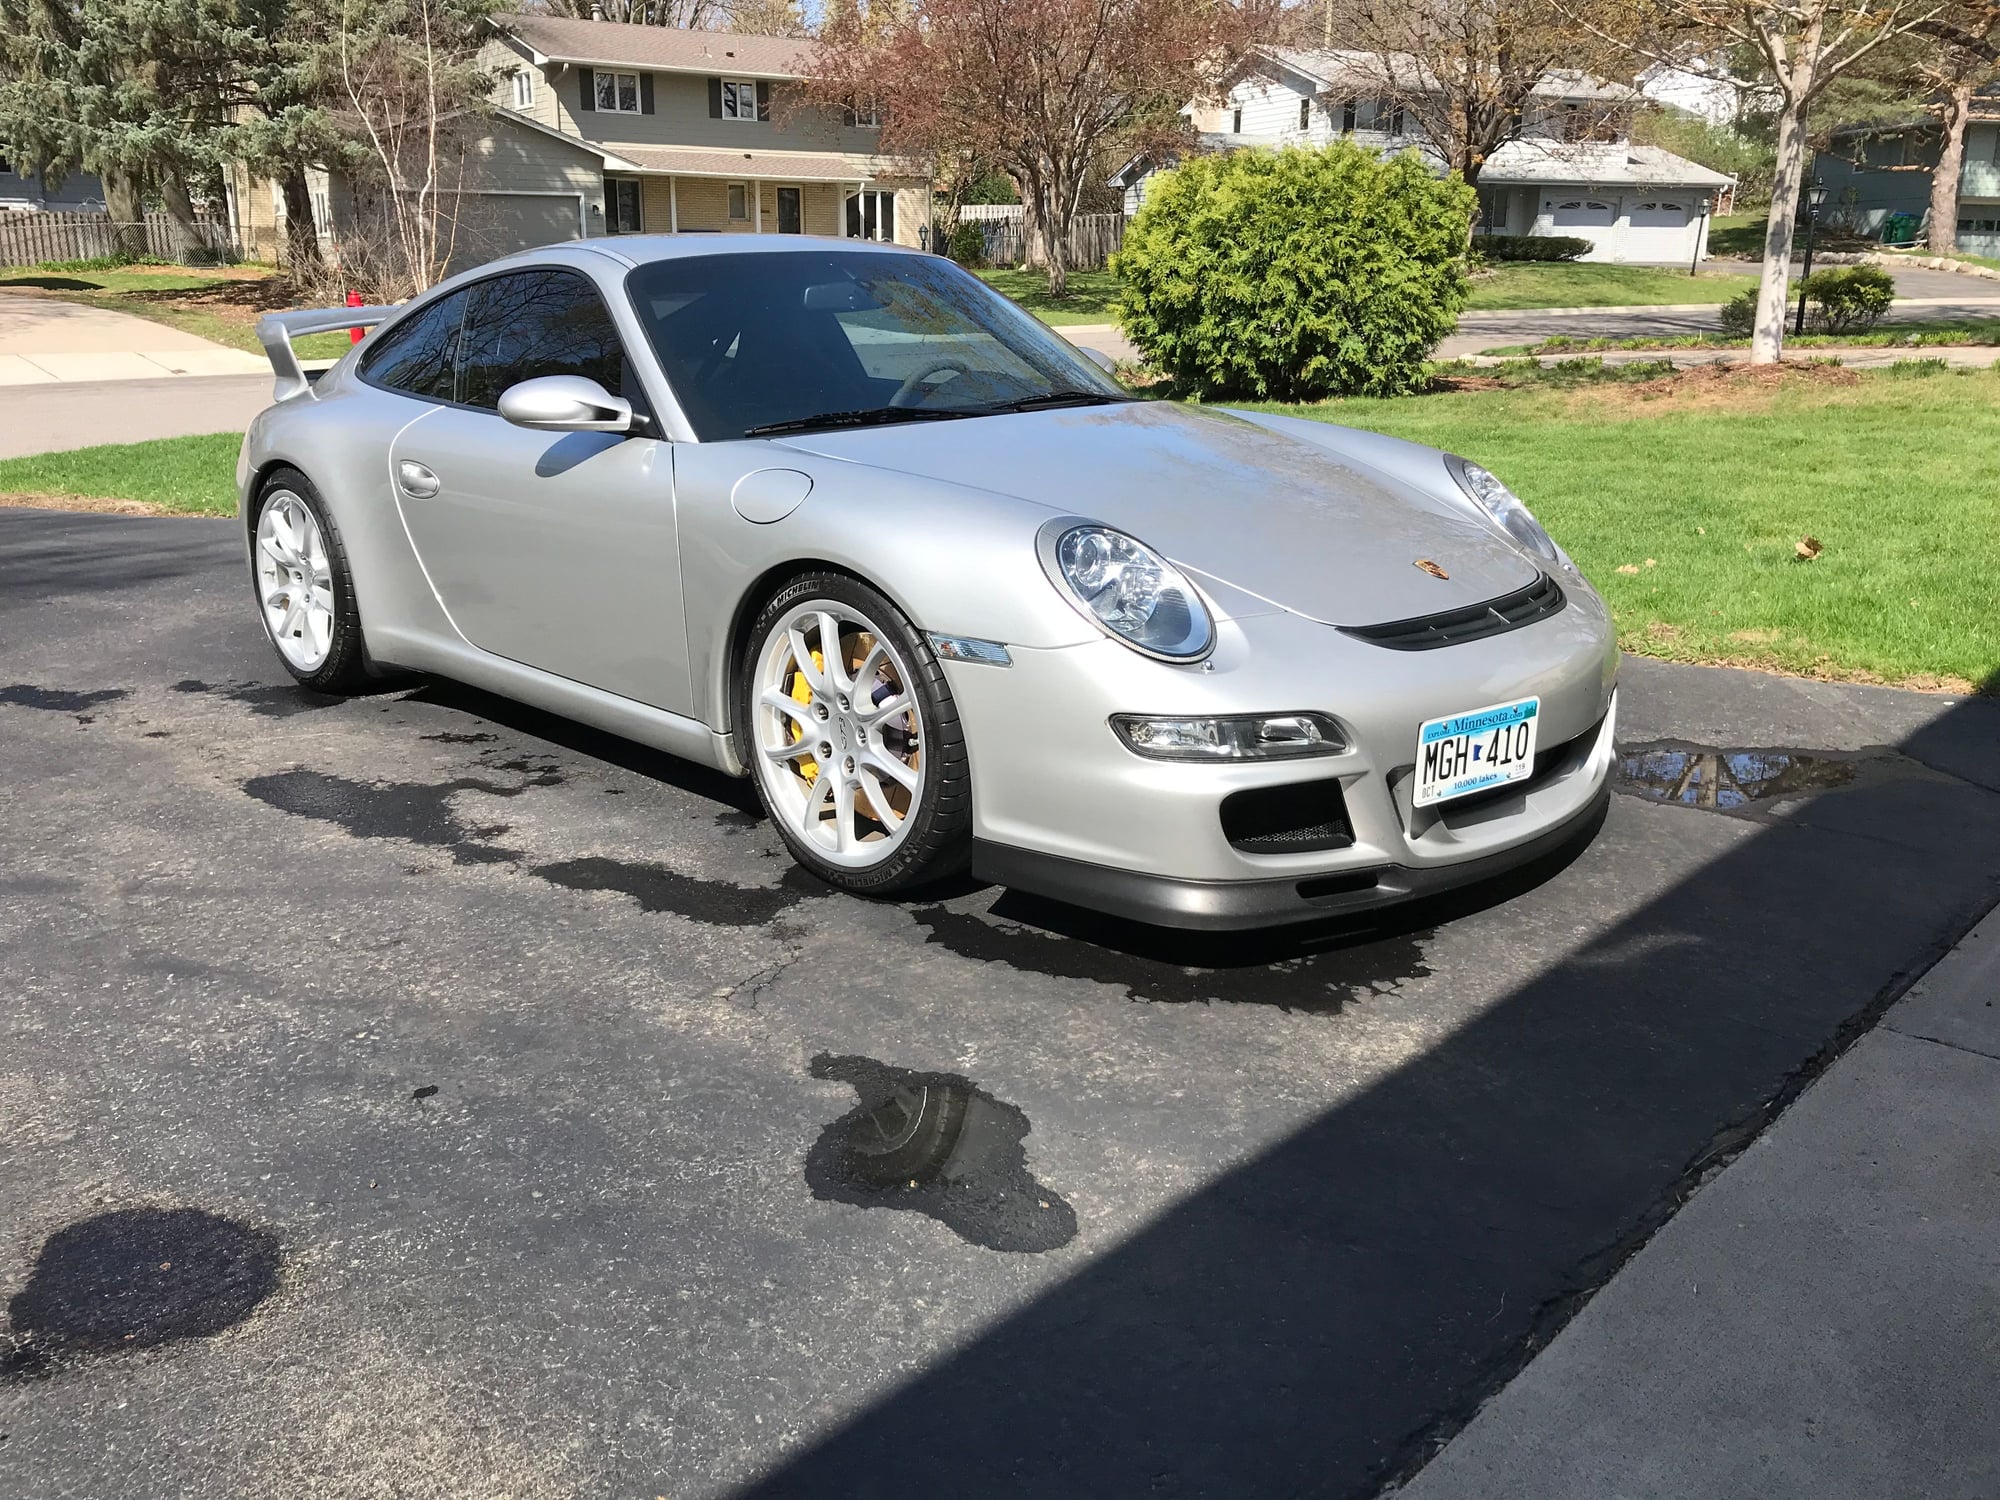 2007 Porsche GT3 - 2007 GT3 Arctic Silver - Used - VIN WP0AC29957S792590 - 6 cyl - 2WD - Manual - Coupe - Silver - Minneapolis, MN 55426, United States